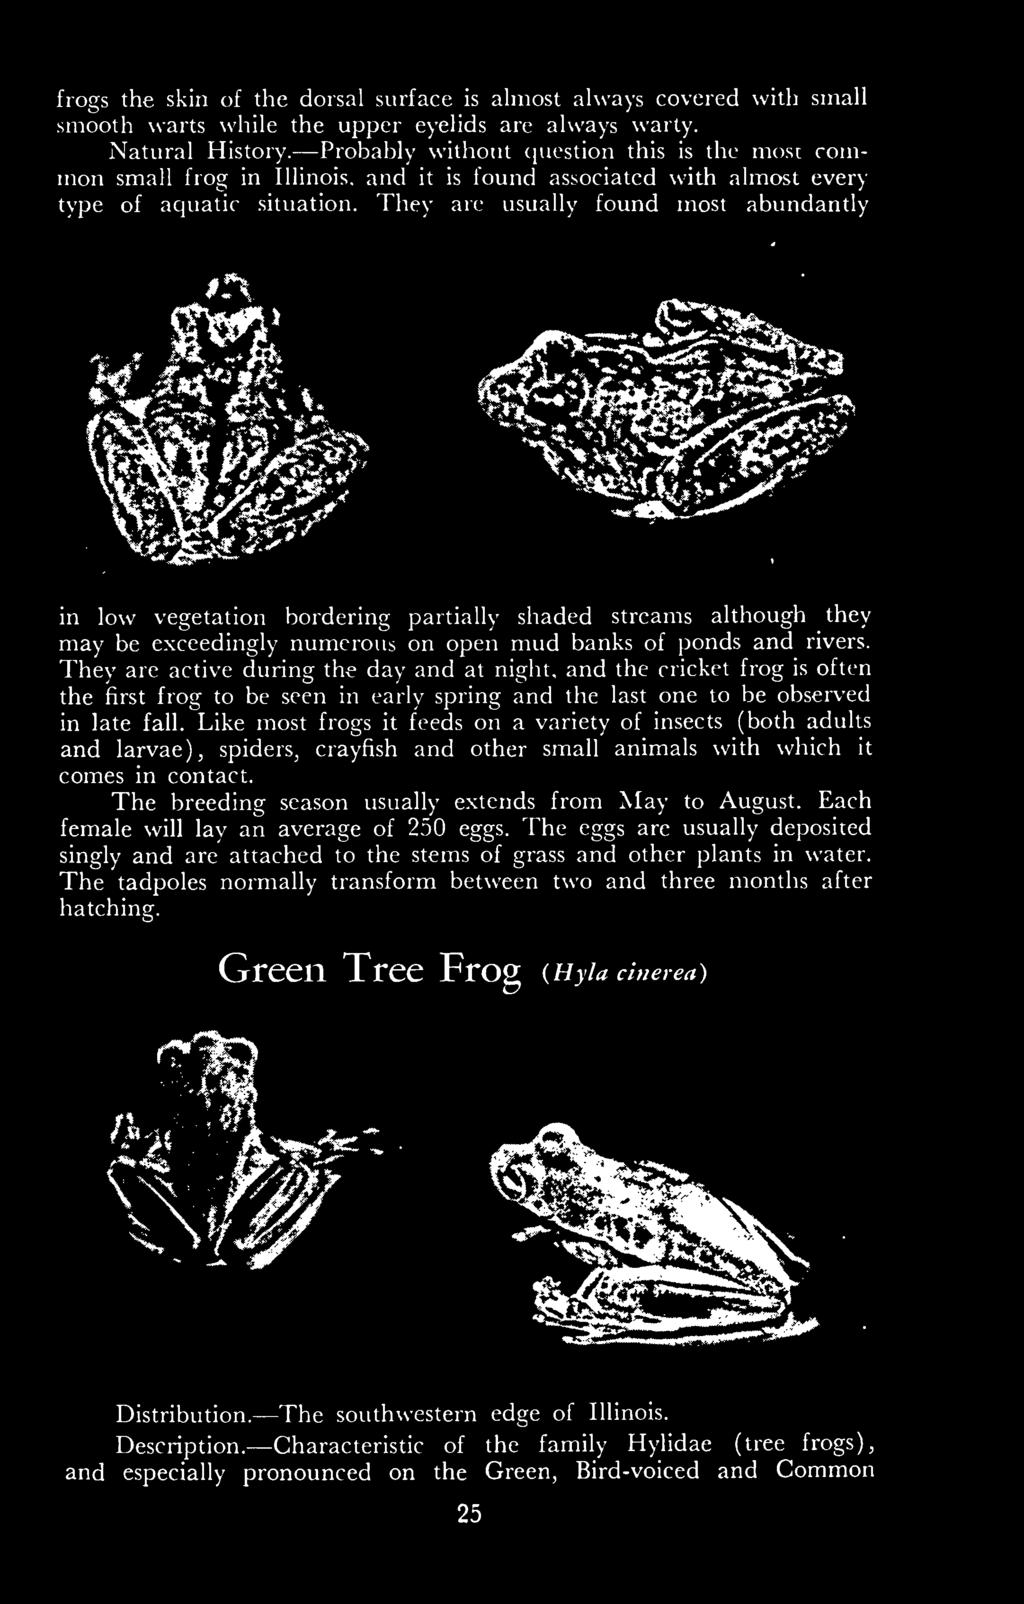 Like most frogs it feeds on a variety of insects (both adults and larvae), spiders, crayfish and other small animals with which it comes in contact.